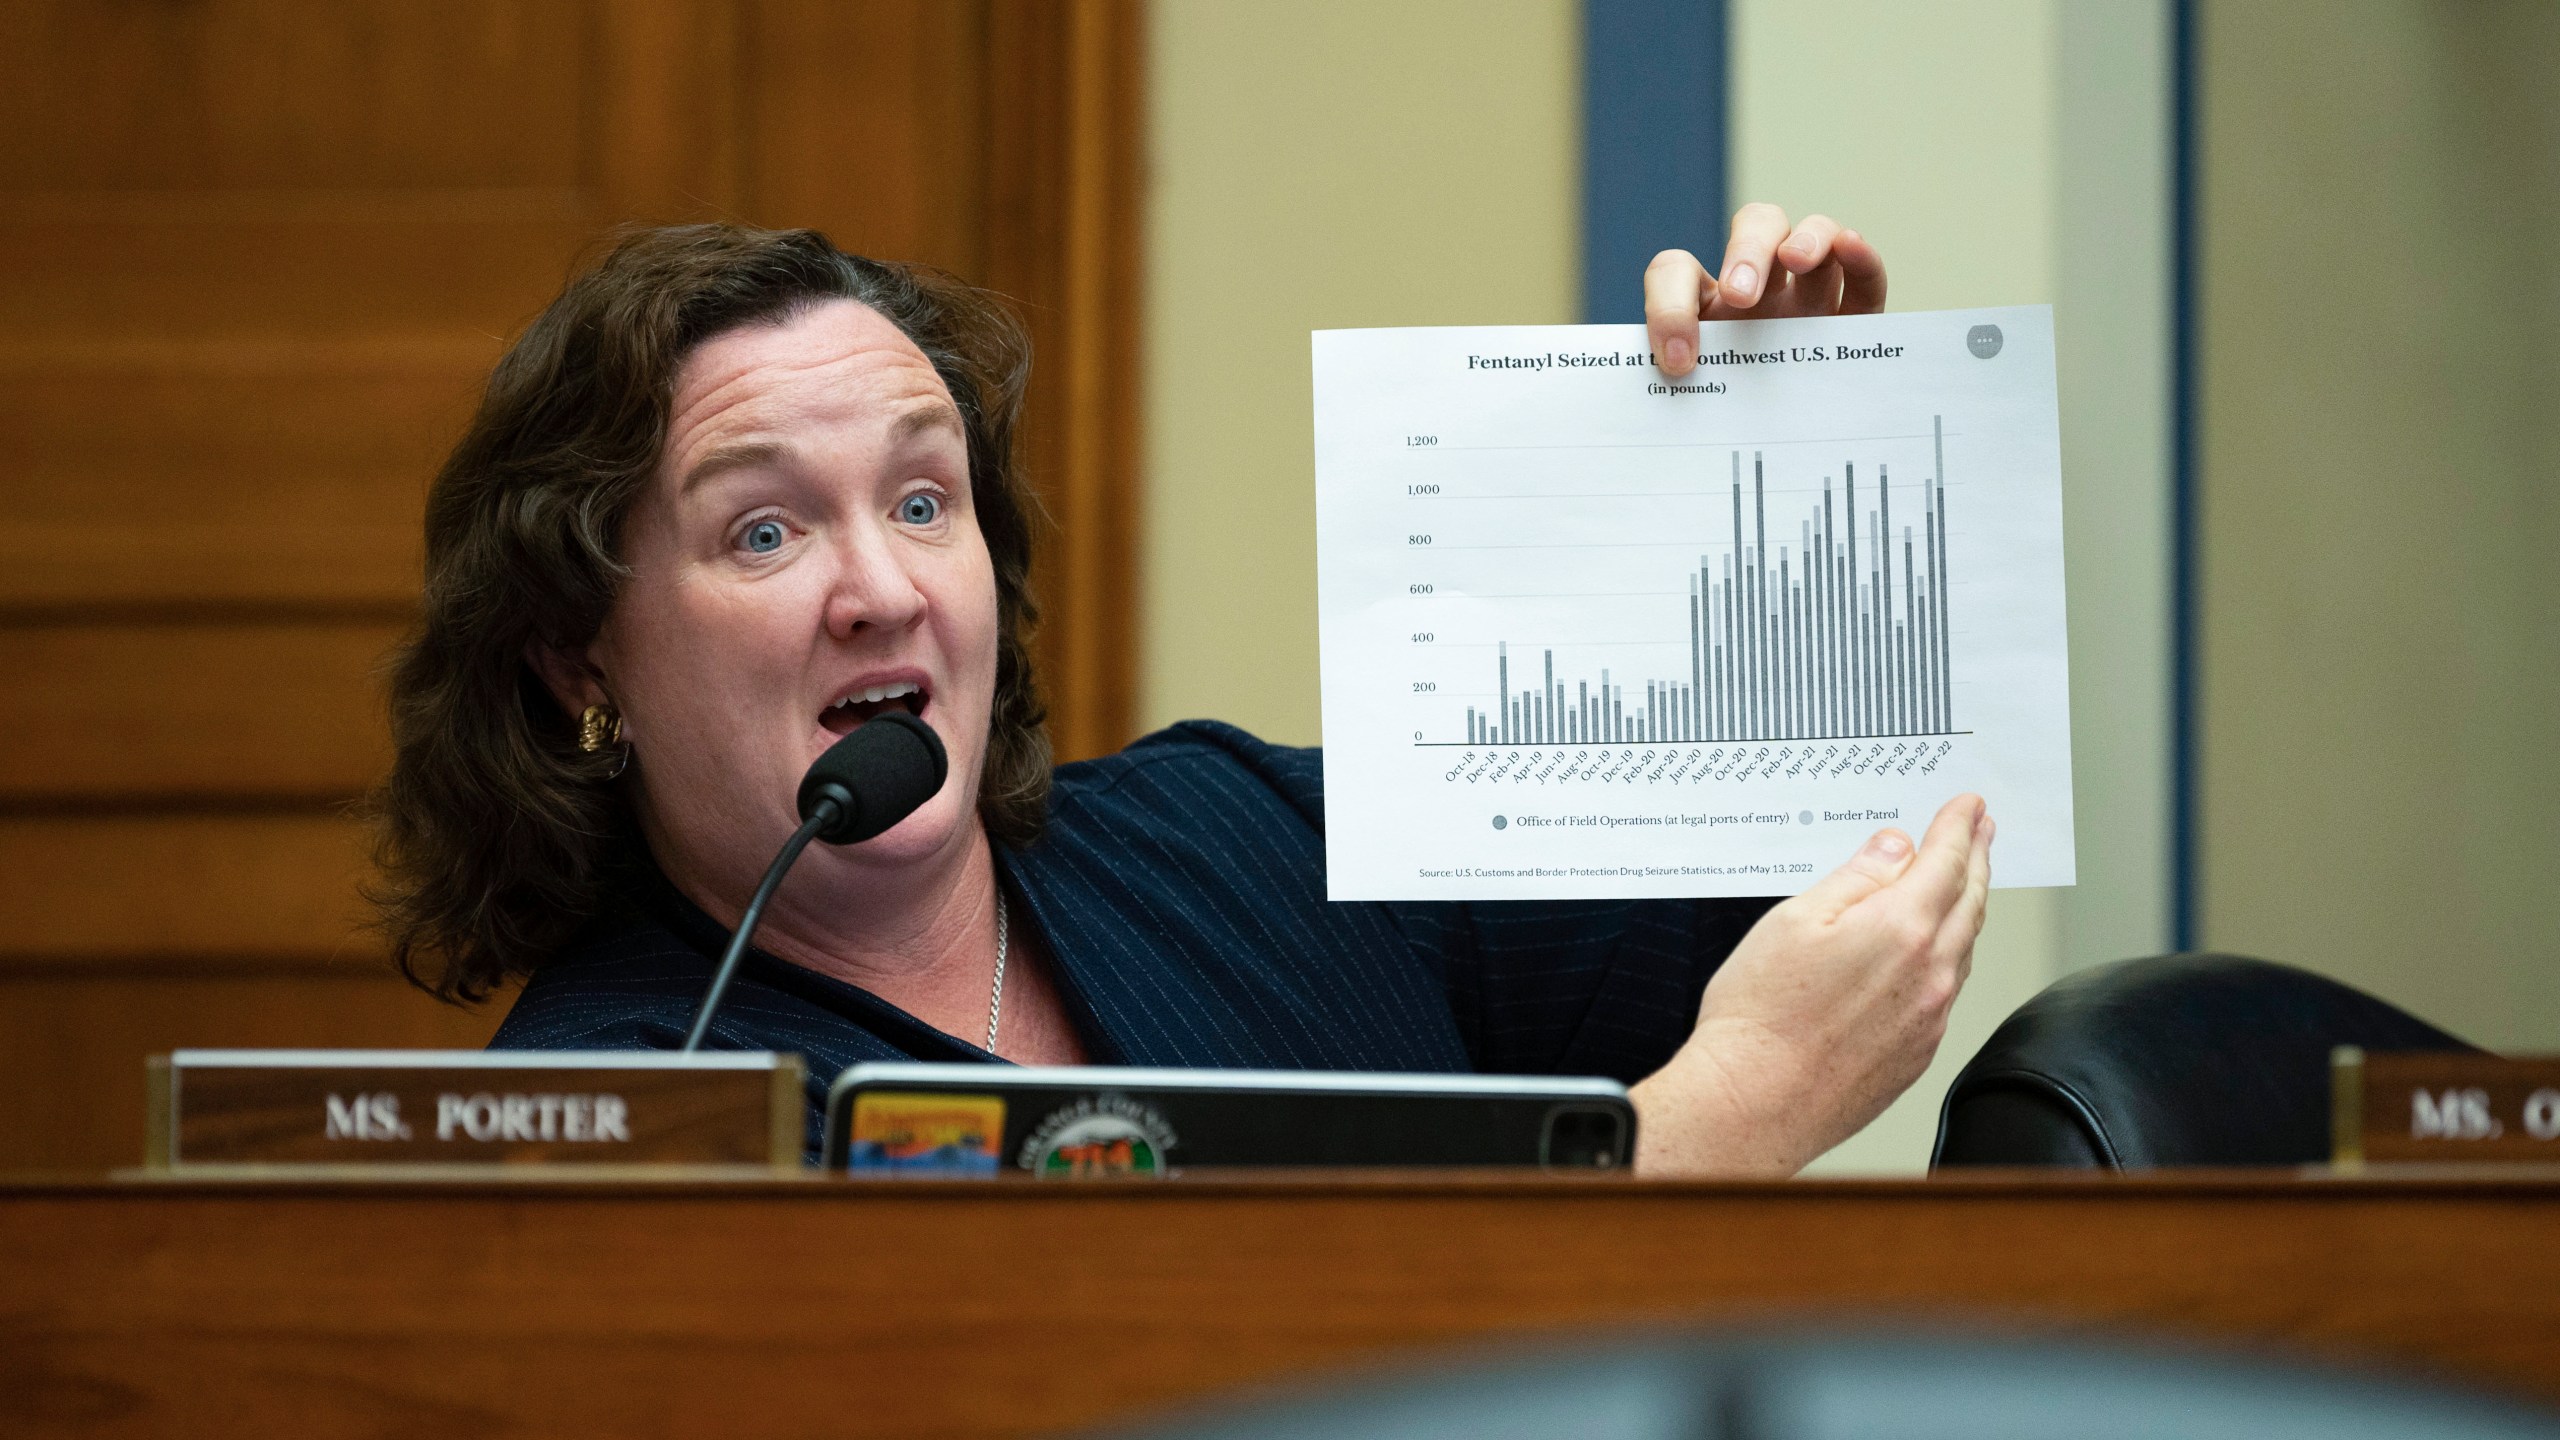 FILE - Rep. Katie Porter, D-Calif., asks questions during a hearing, Feb. 7, 2023, in Washington. Porter built a social media reputation by wielding a white board at congressional hearings, and that helped propelled her campaign for the Senate. But on Super Tuesday, the numbers didn't add up for her in the primary and she'll be out of a job in Washington come January. (AP Photo/Kevin Wolf)